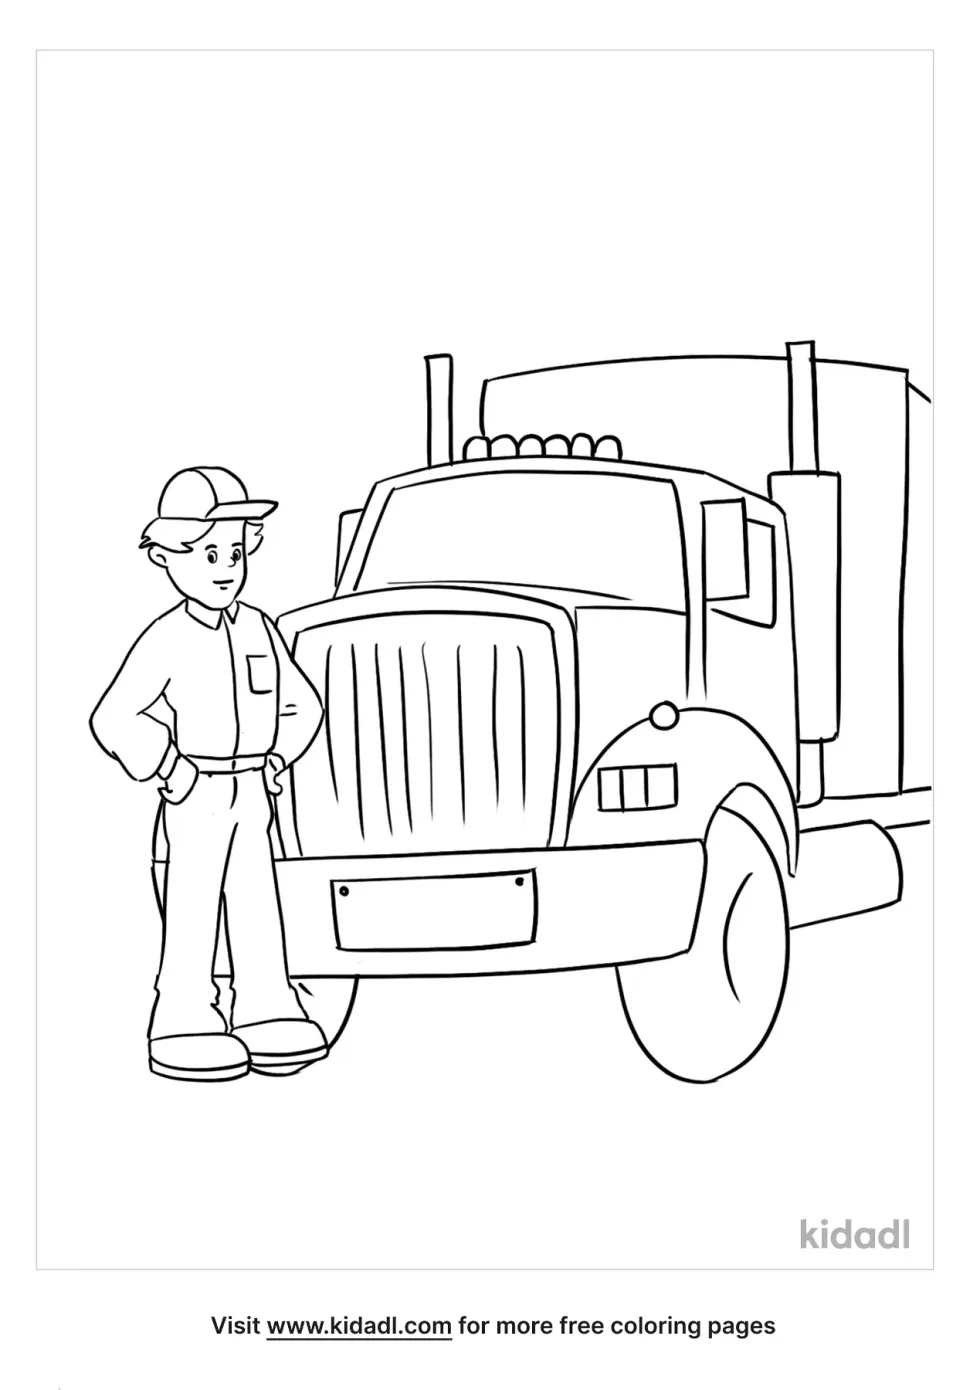 Truck Driver Coloring Page